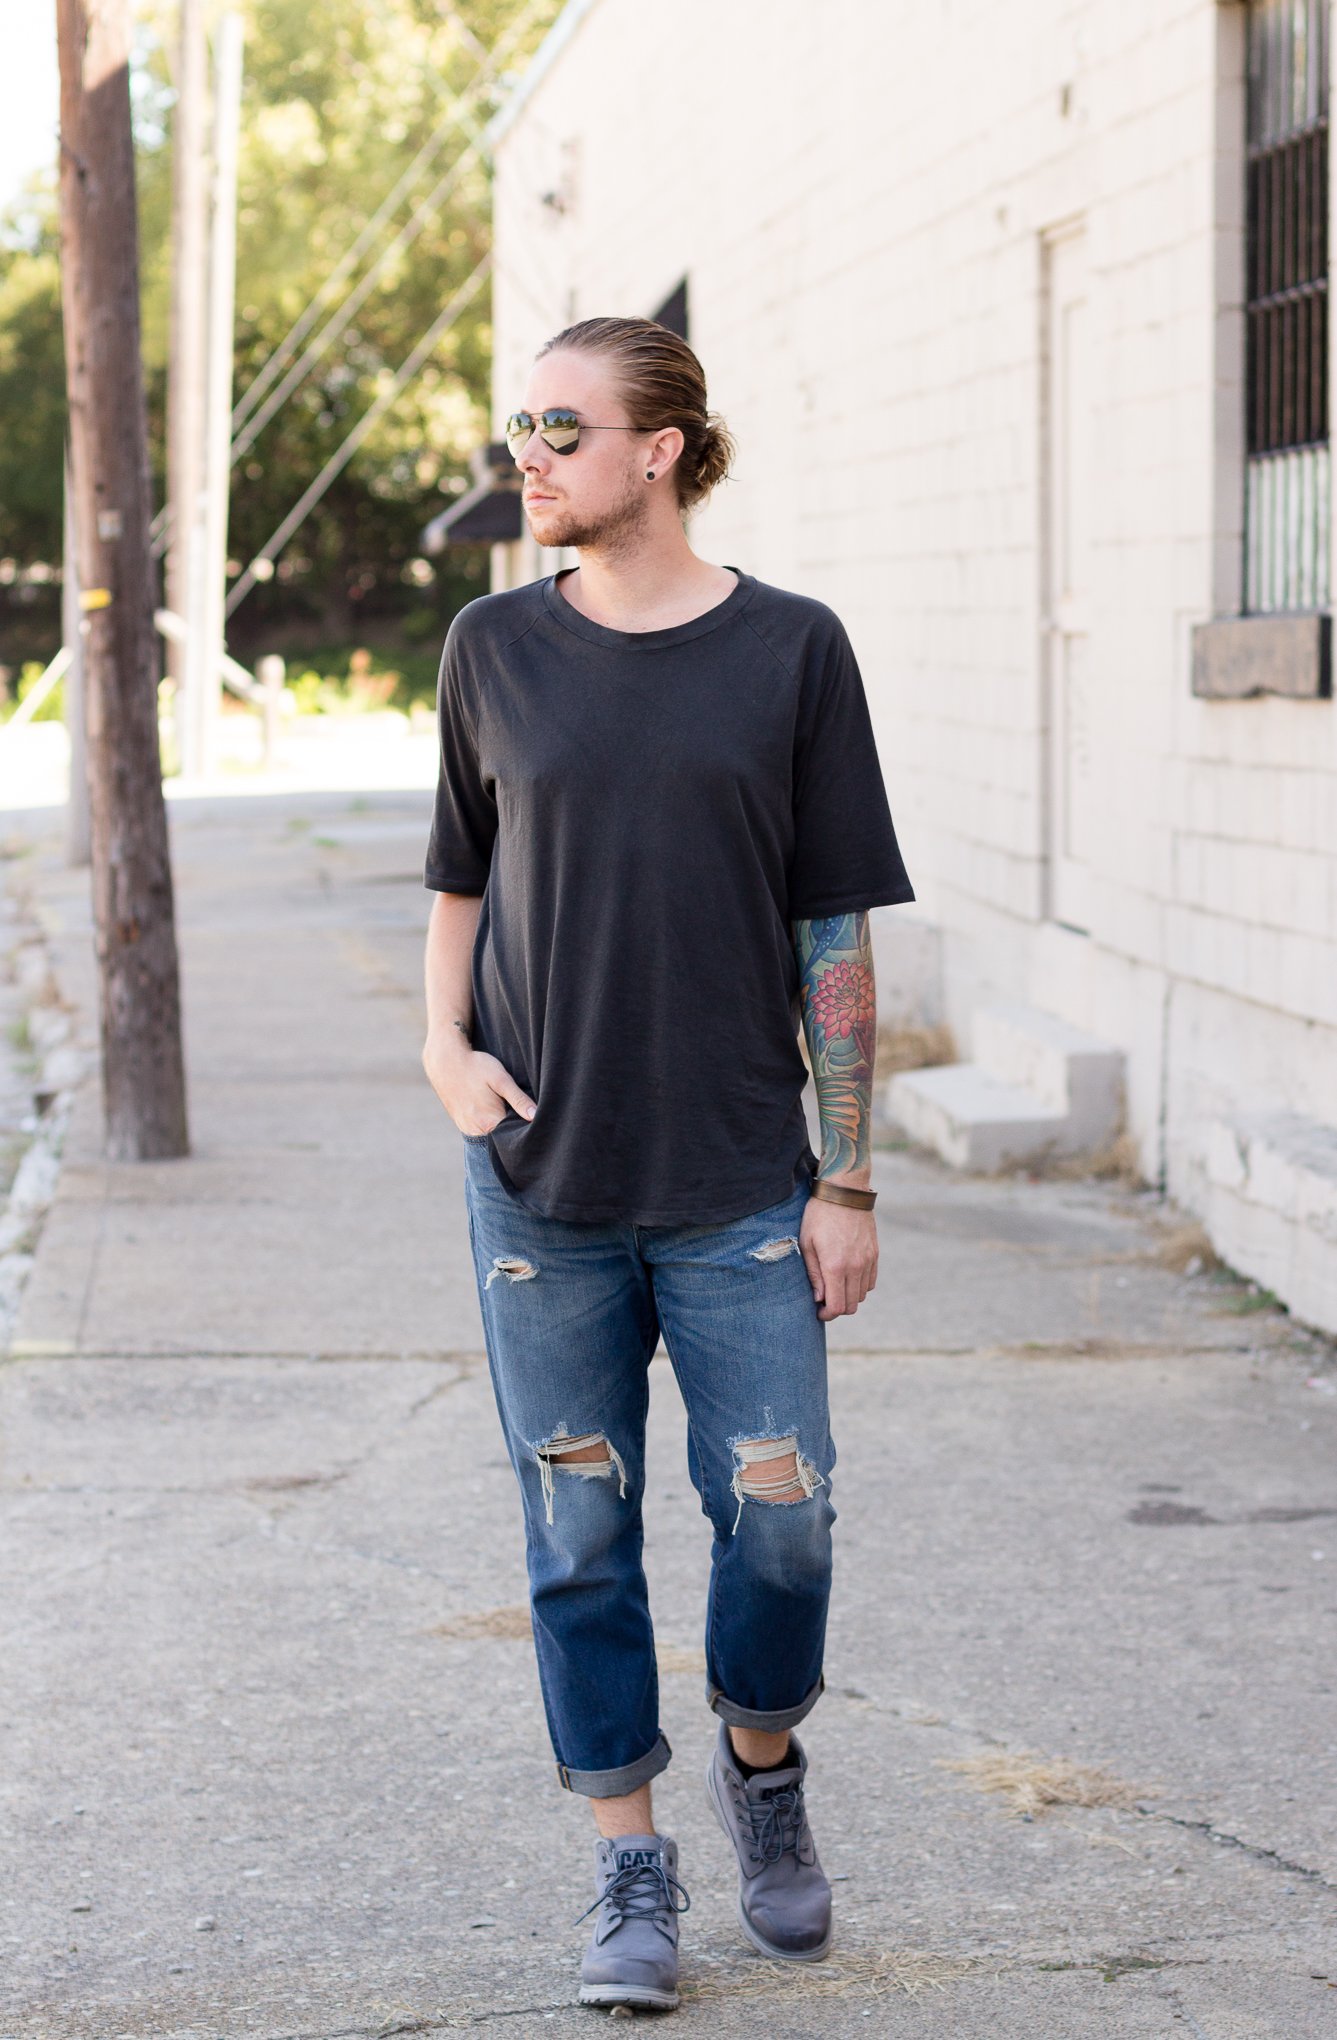 madewell denim, cat footwear, boyfriend fit jeans, how to wear oversized clothing, mens fashion blogger